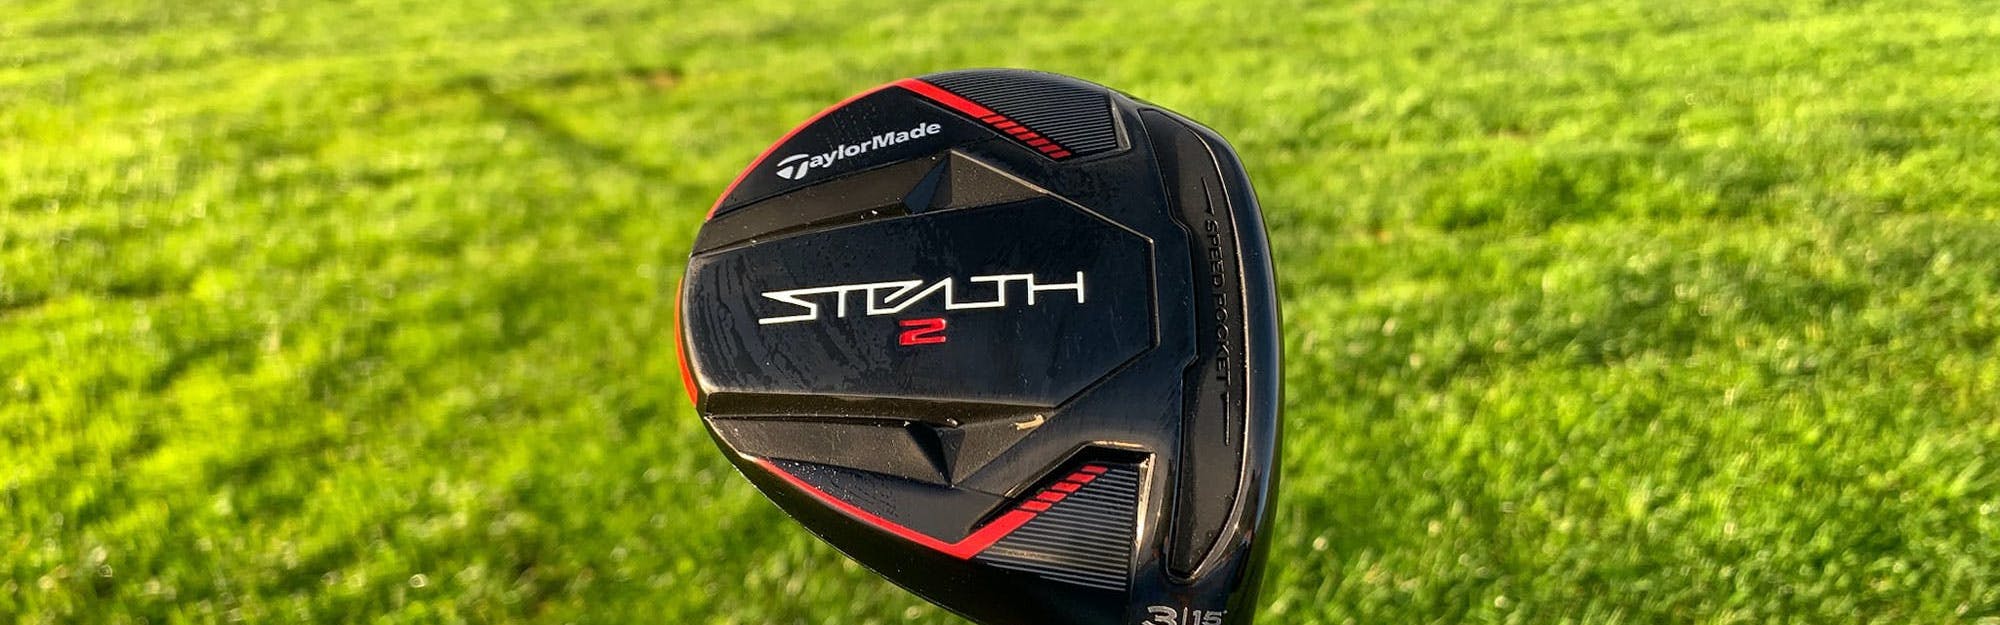 The TaylorMade Stealth 2 Fairway Wood.